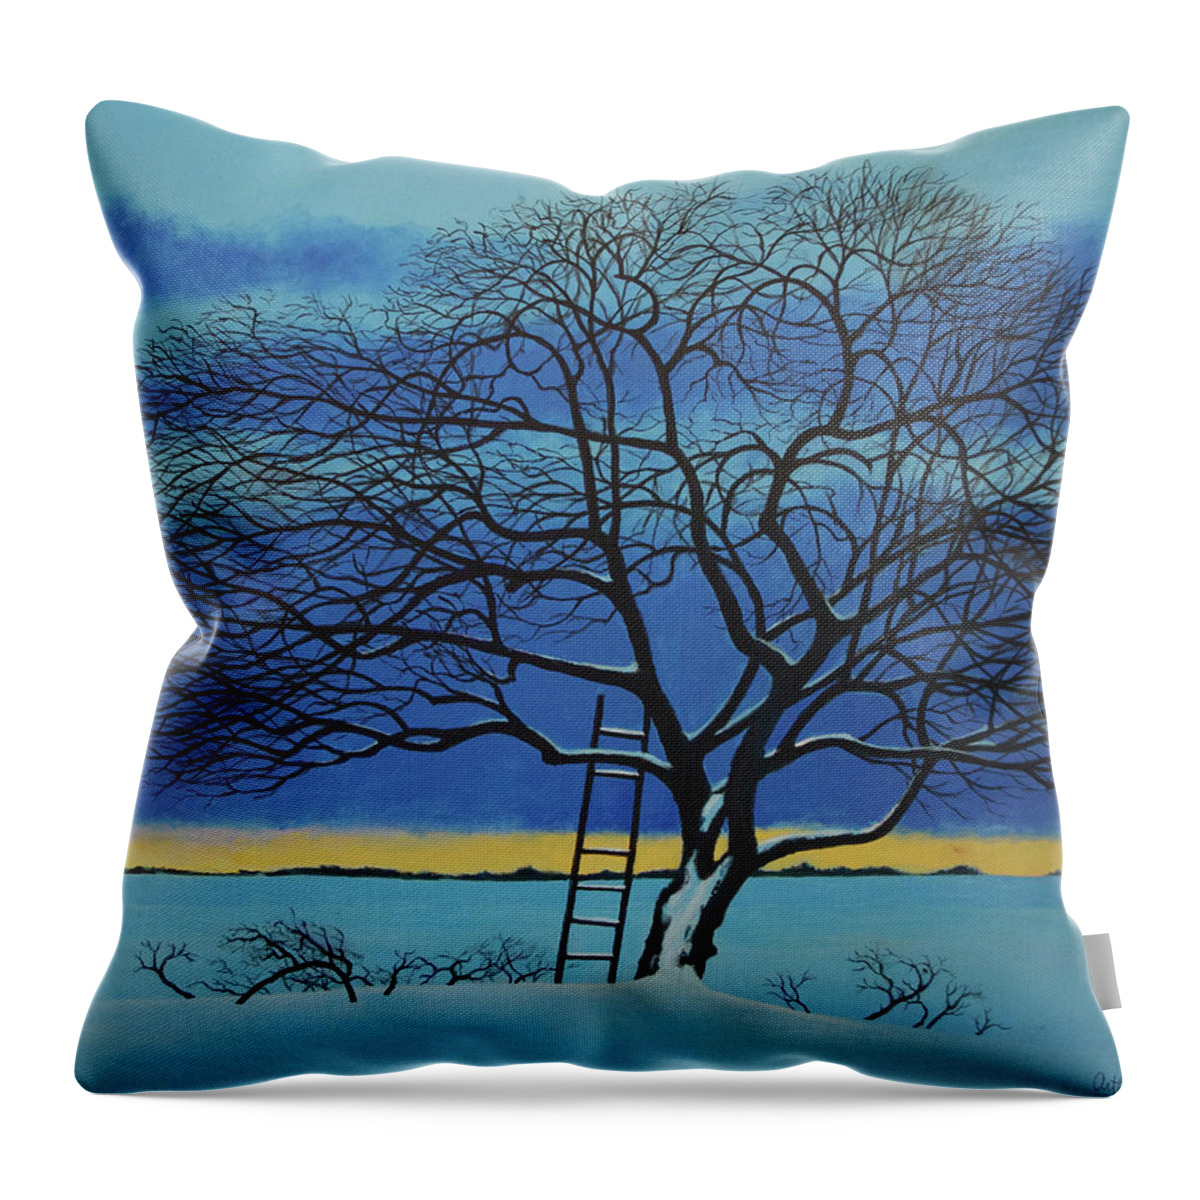 Sky Throw Pillow featuring the painting Under Heaven by Arthur Barnes